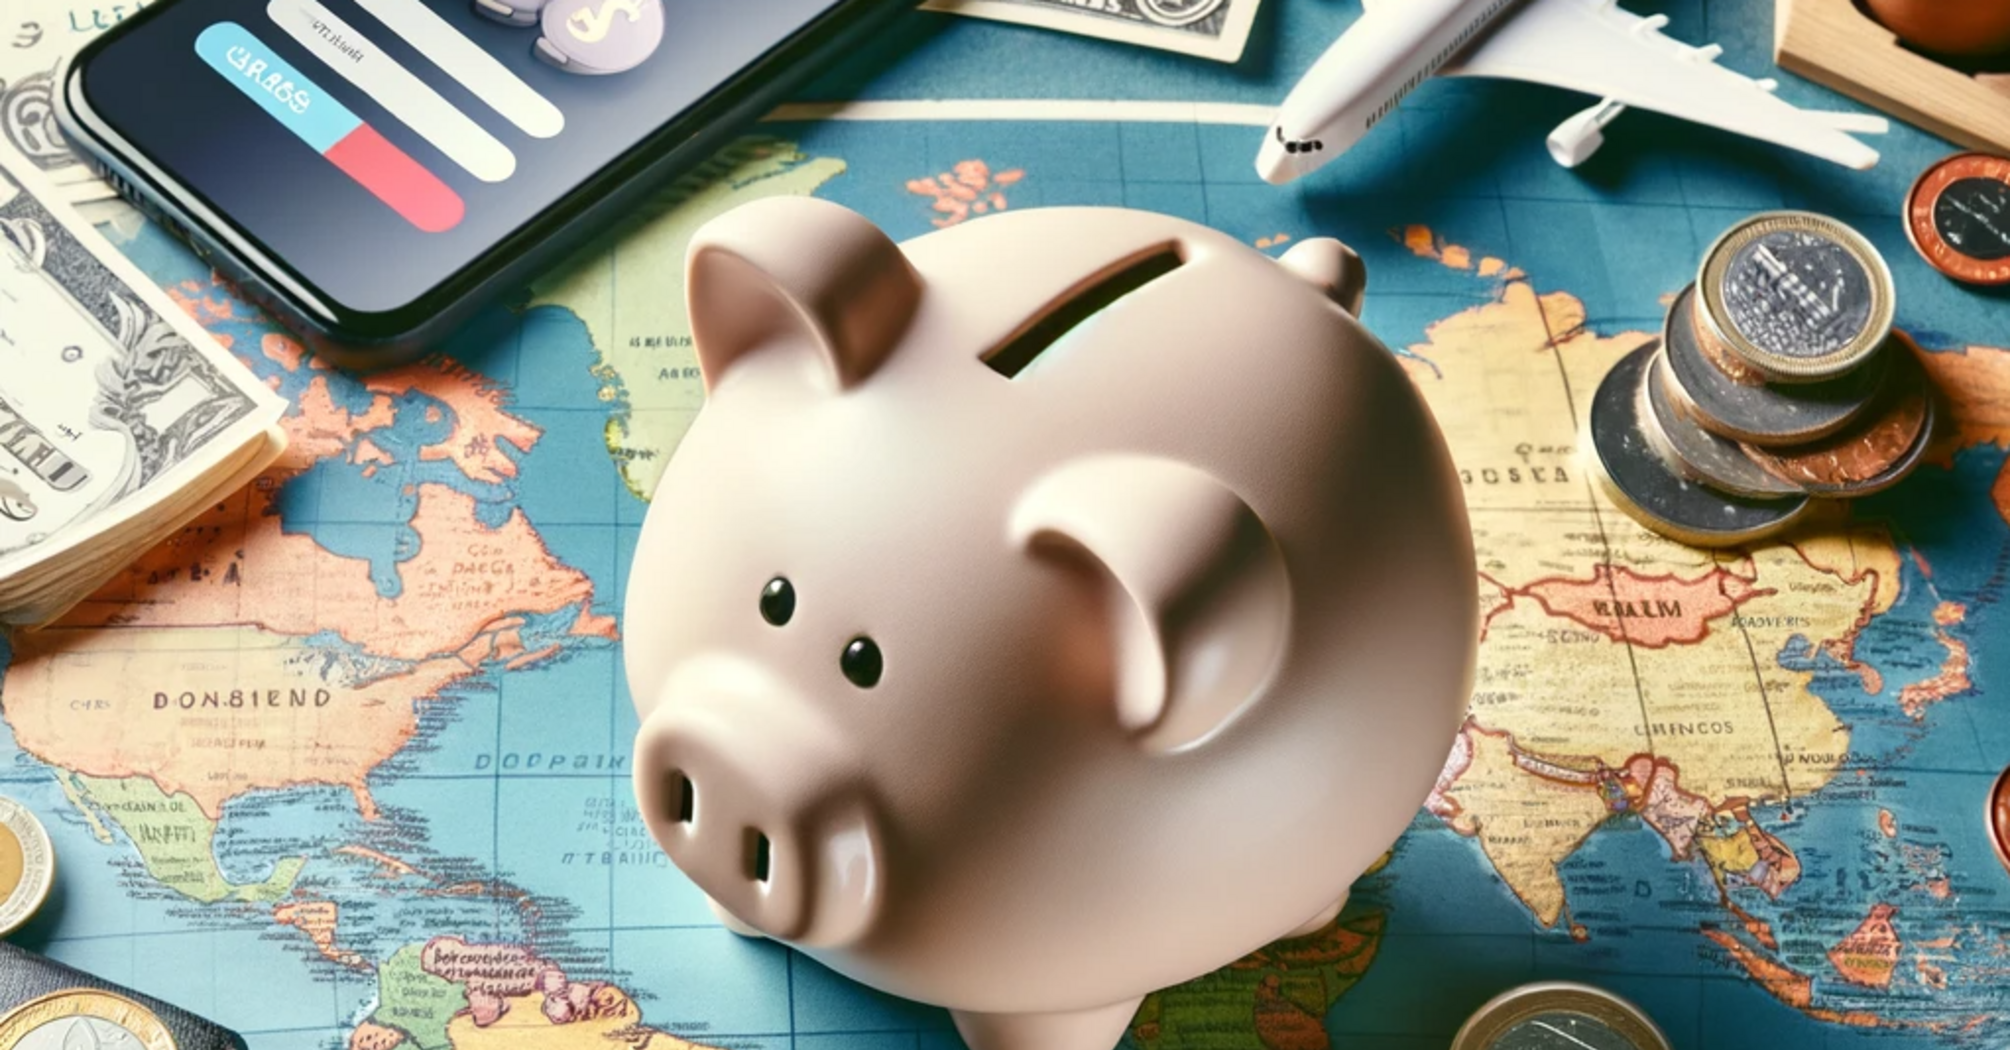 Piggy bank on world map with currency symbols, cashback app, passports, and plane tickets